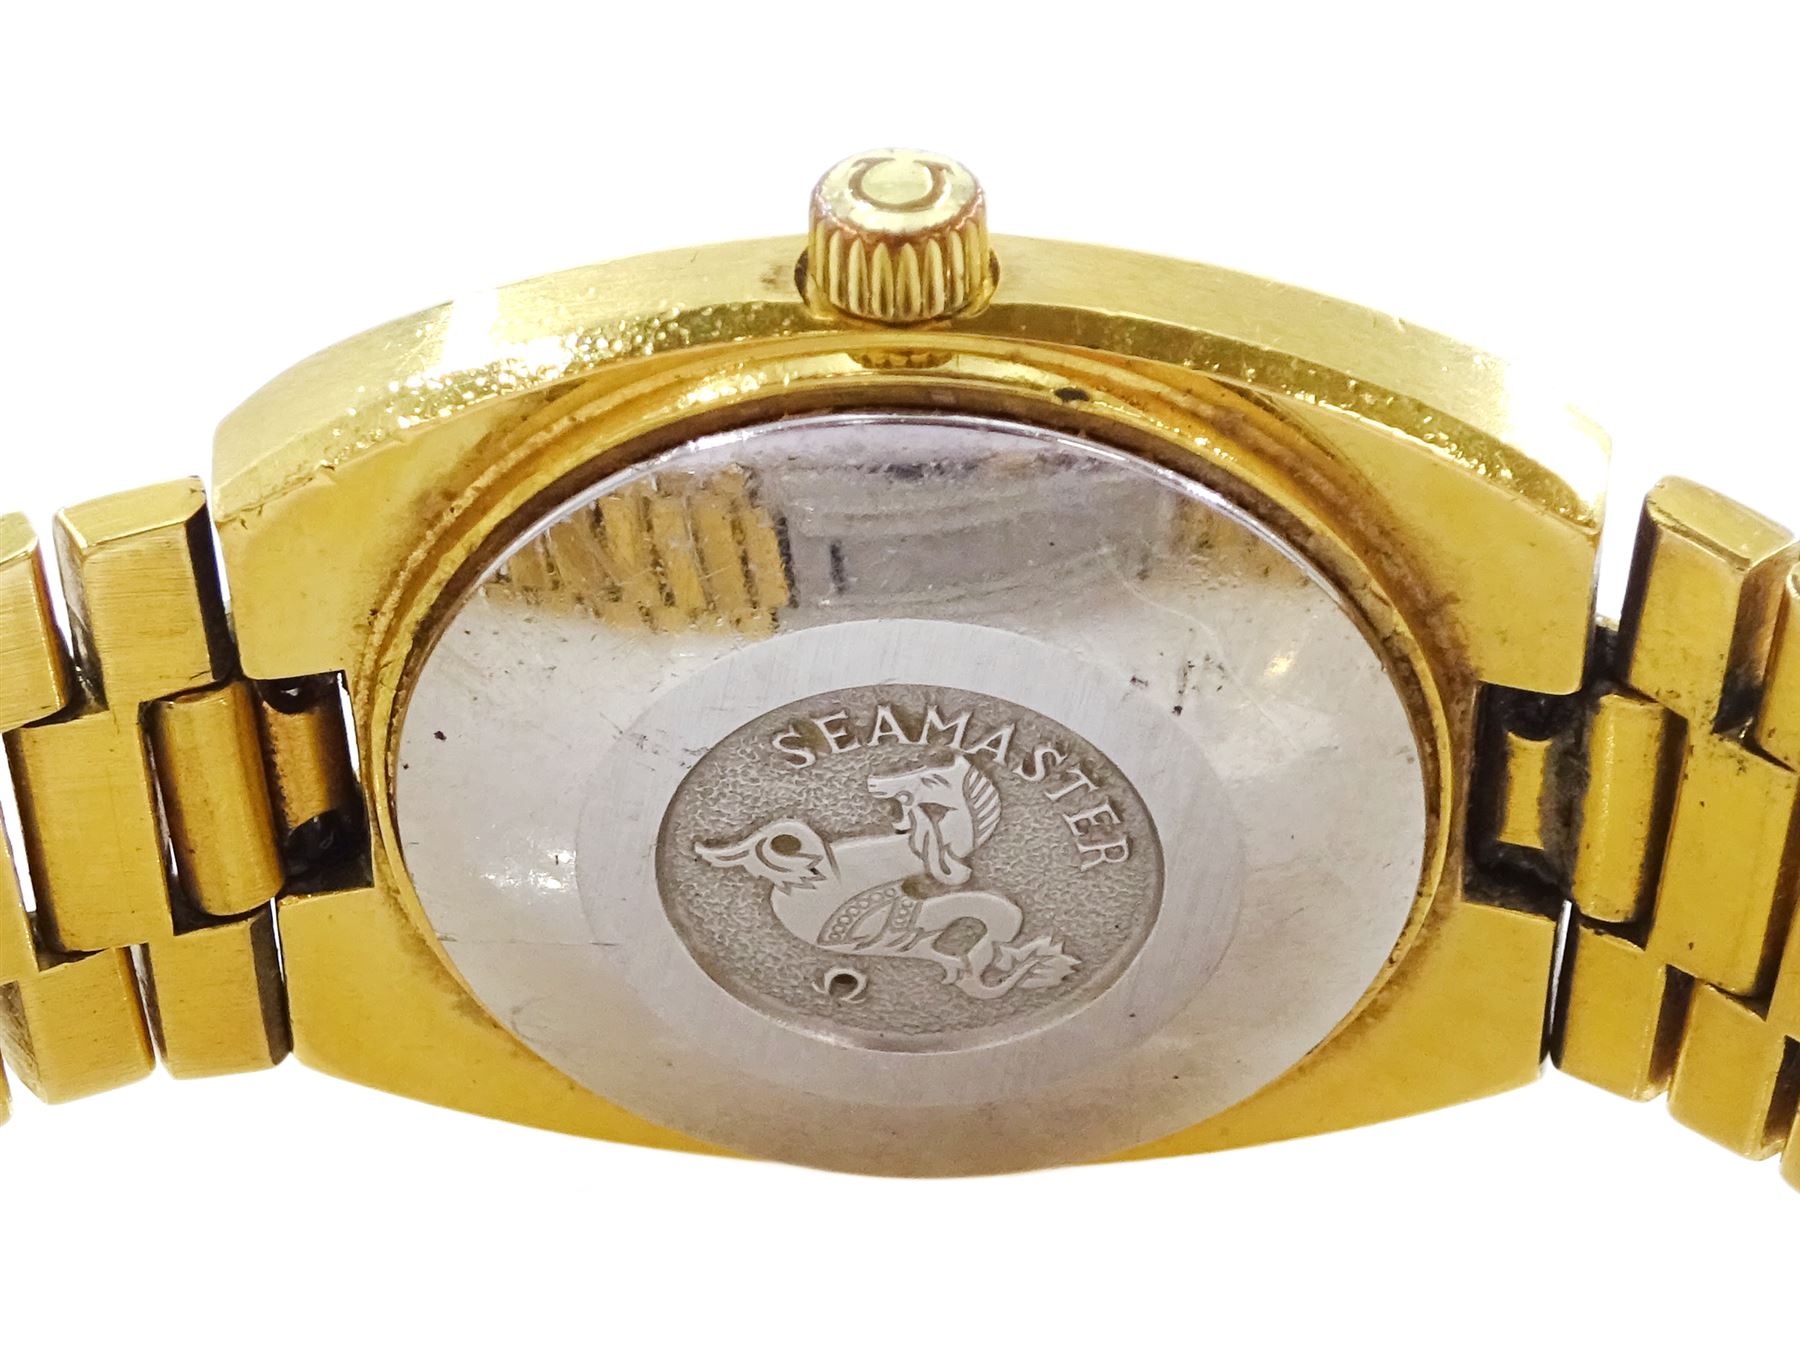 Omega Seamaster ladies gold-plated and stainless steel automatic wristwatch - Image 3 of 3